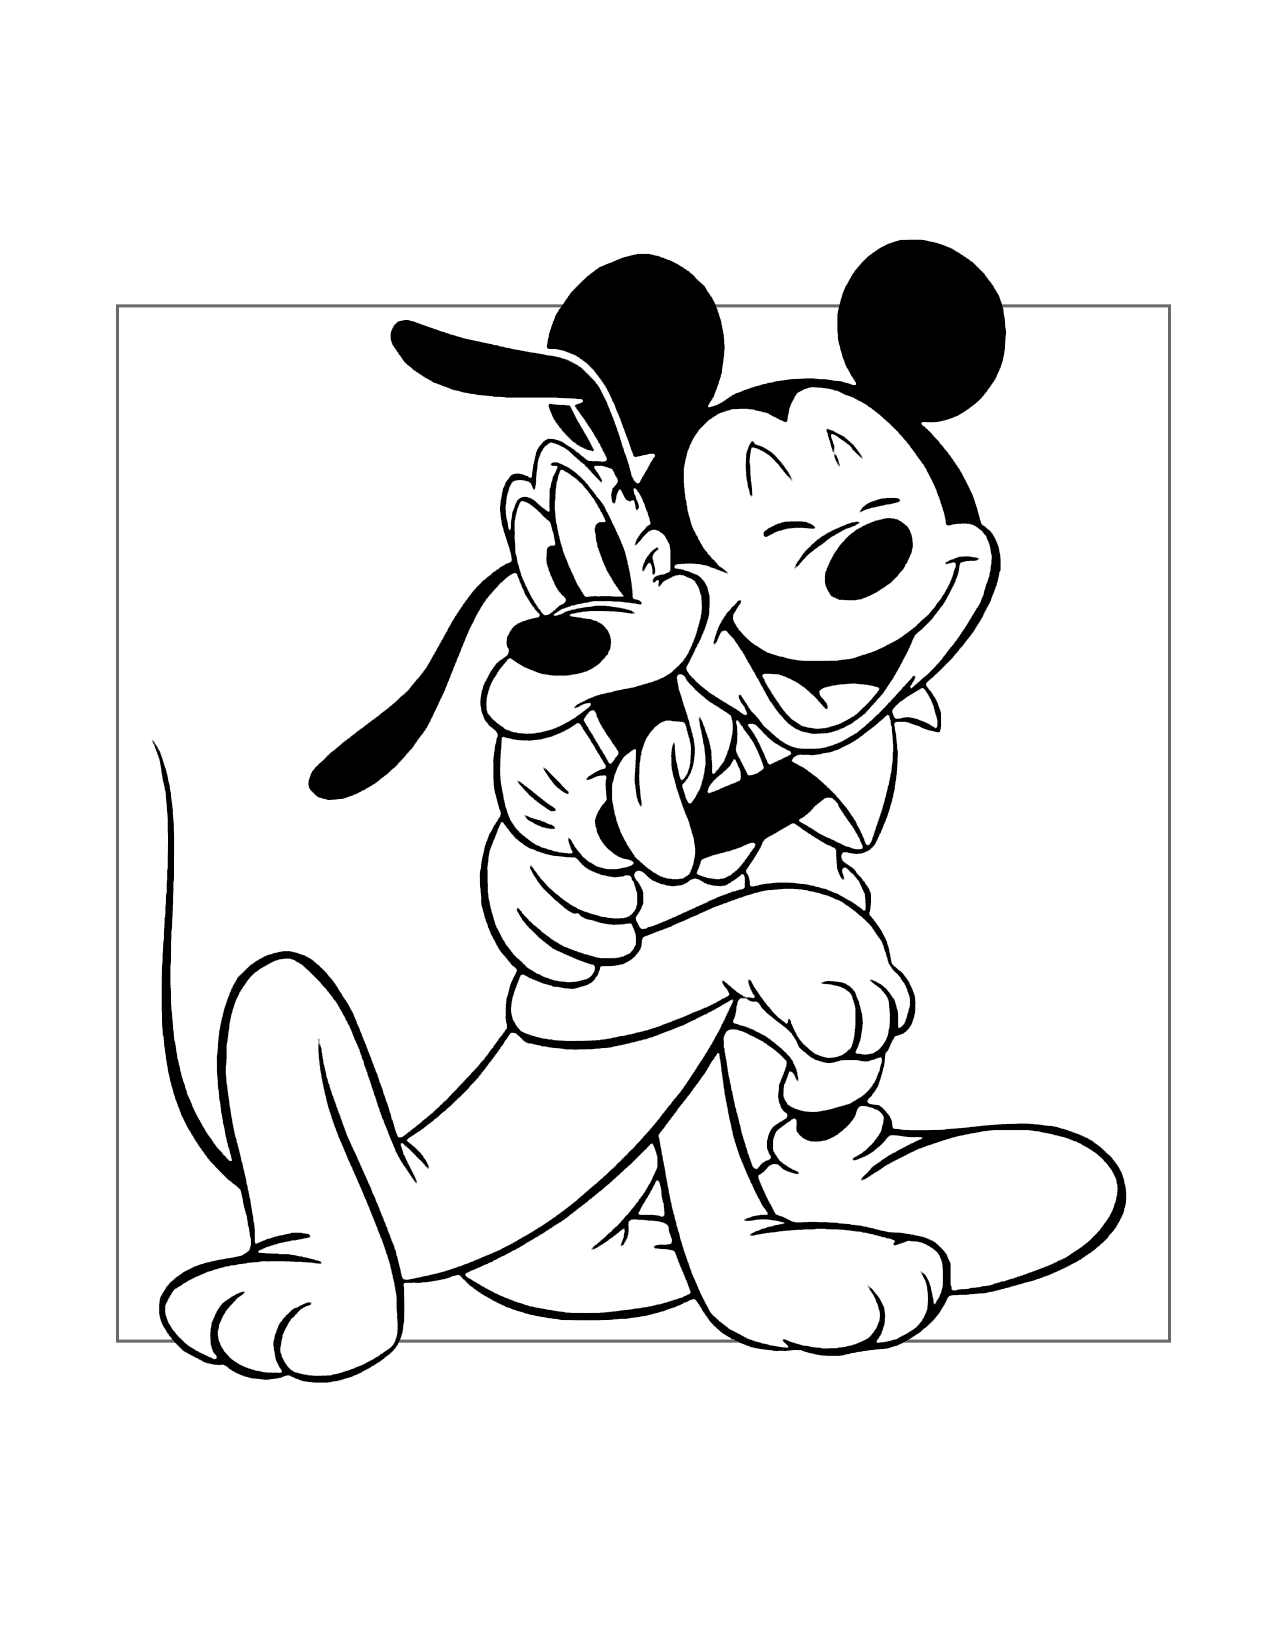 Mickey Mouse Loves His Dog Pluto Coloring Page